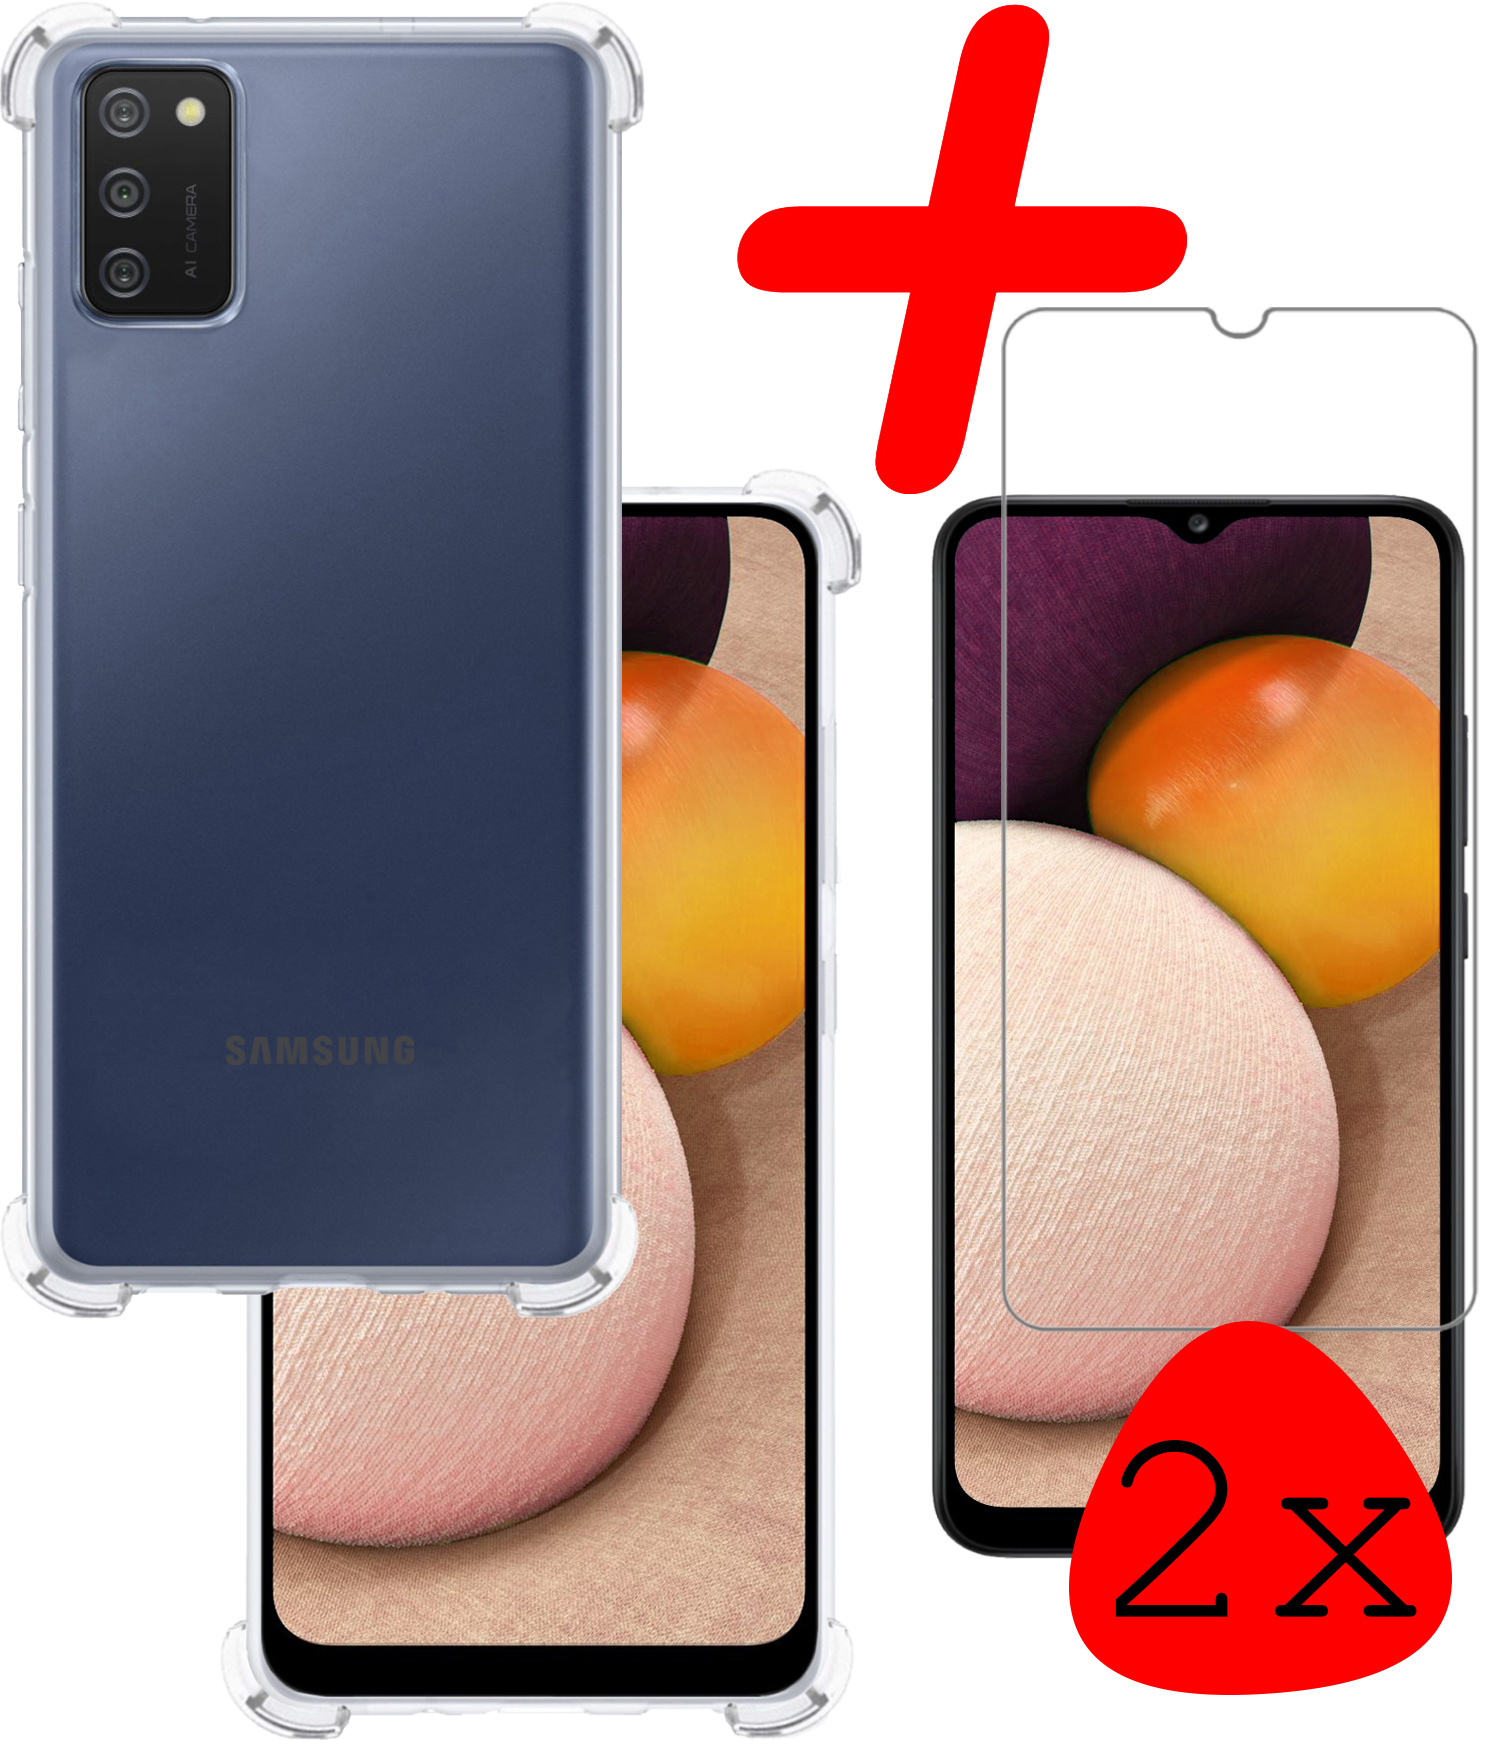 BASEY. Samsung Galaxy A02s Hoesje Shock Proof Met 2x Screenprotector Tempered Glass - Samsung Galaxy A02s Screen Protector Beschermglas Hoes Shockproof - Transparant